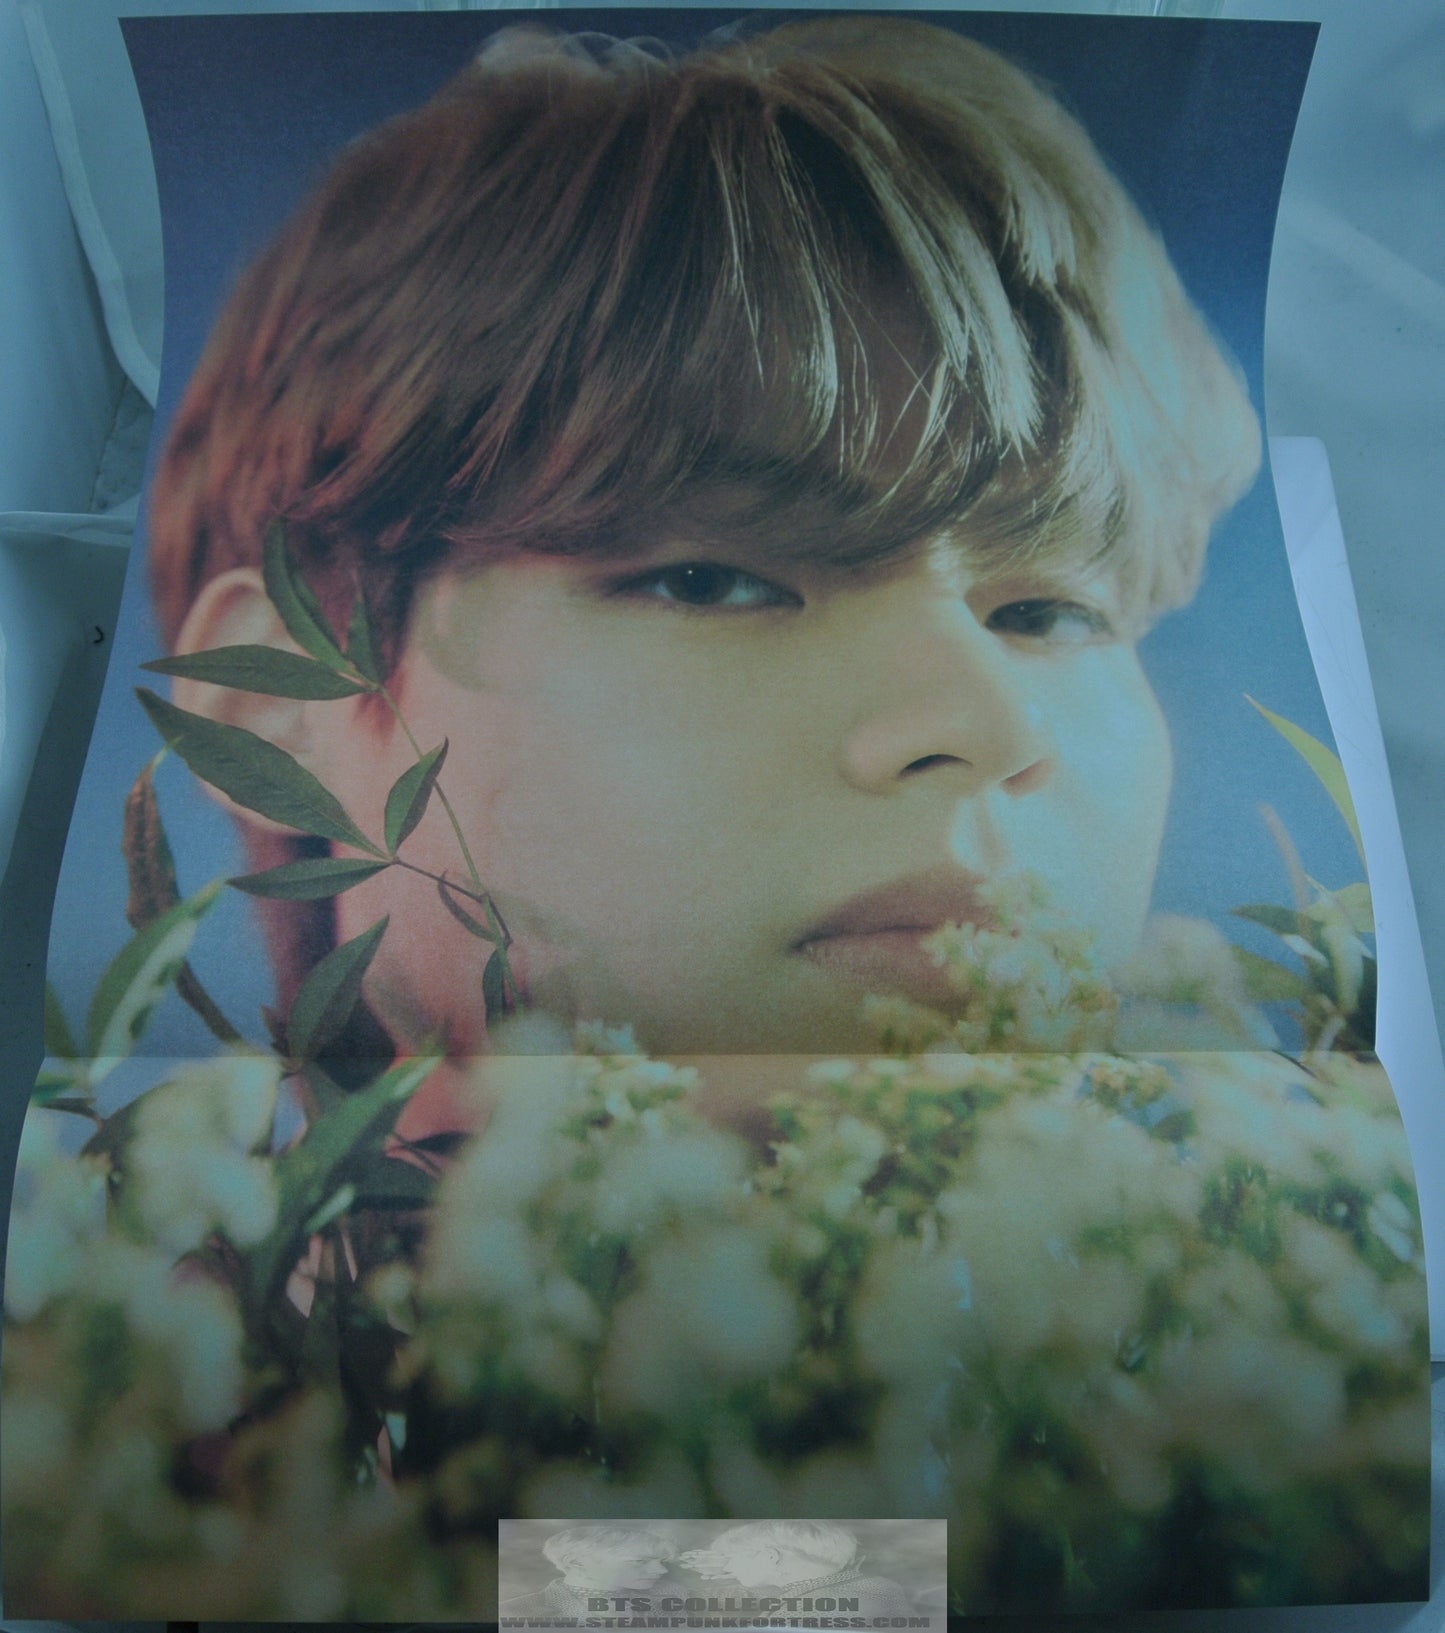 BTS V KIM TAEHYUNG FOLDED POSTER CLOSE COLOR 11.75" X 16.5" HYBE INSIGHT LIMITED EDITION OFFICIAL MERCHANDISE